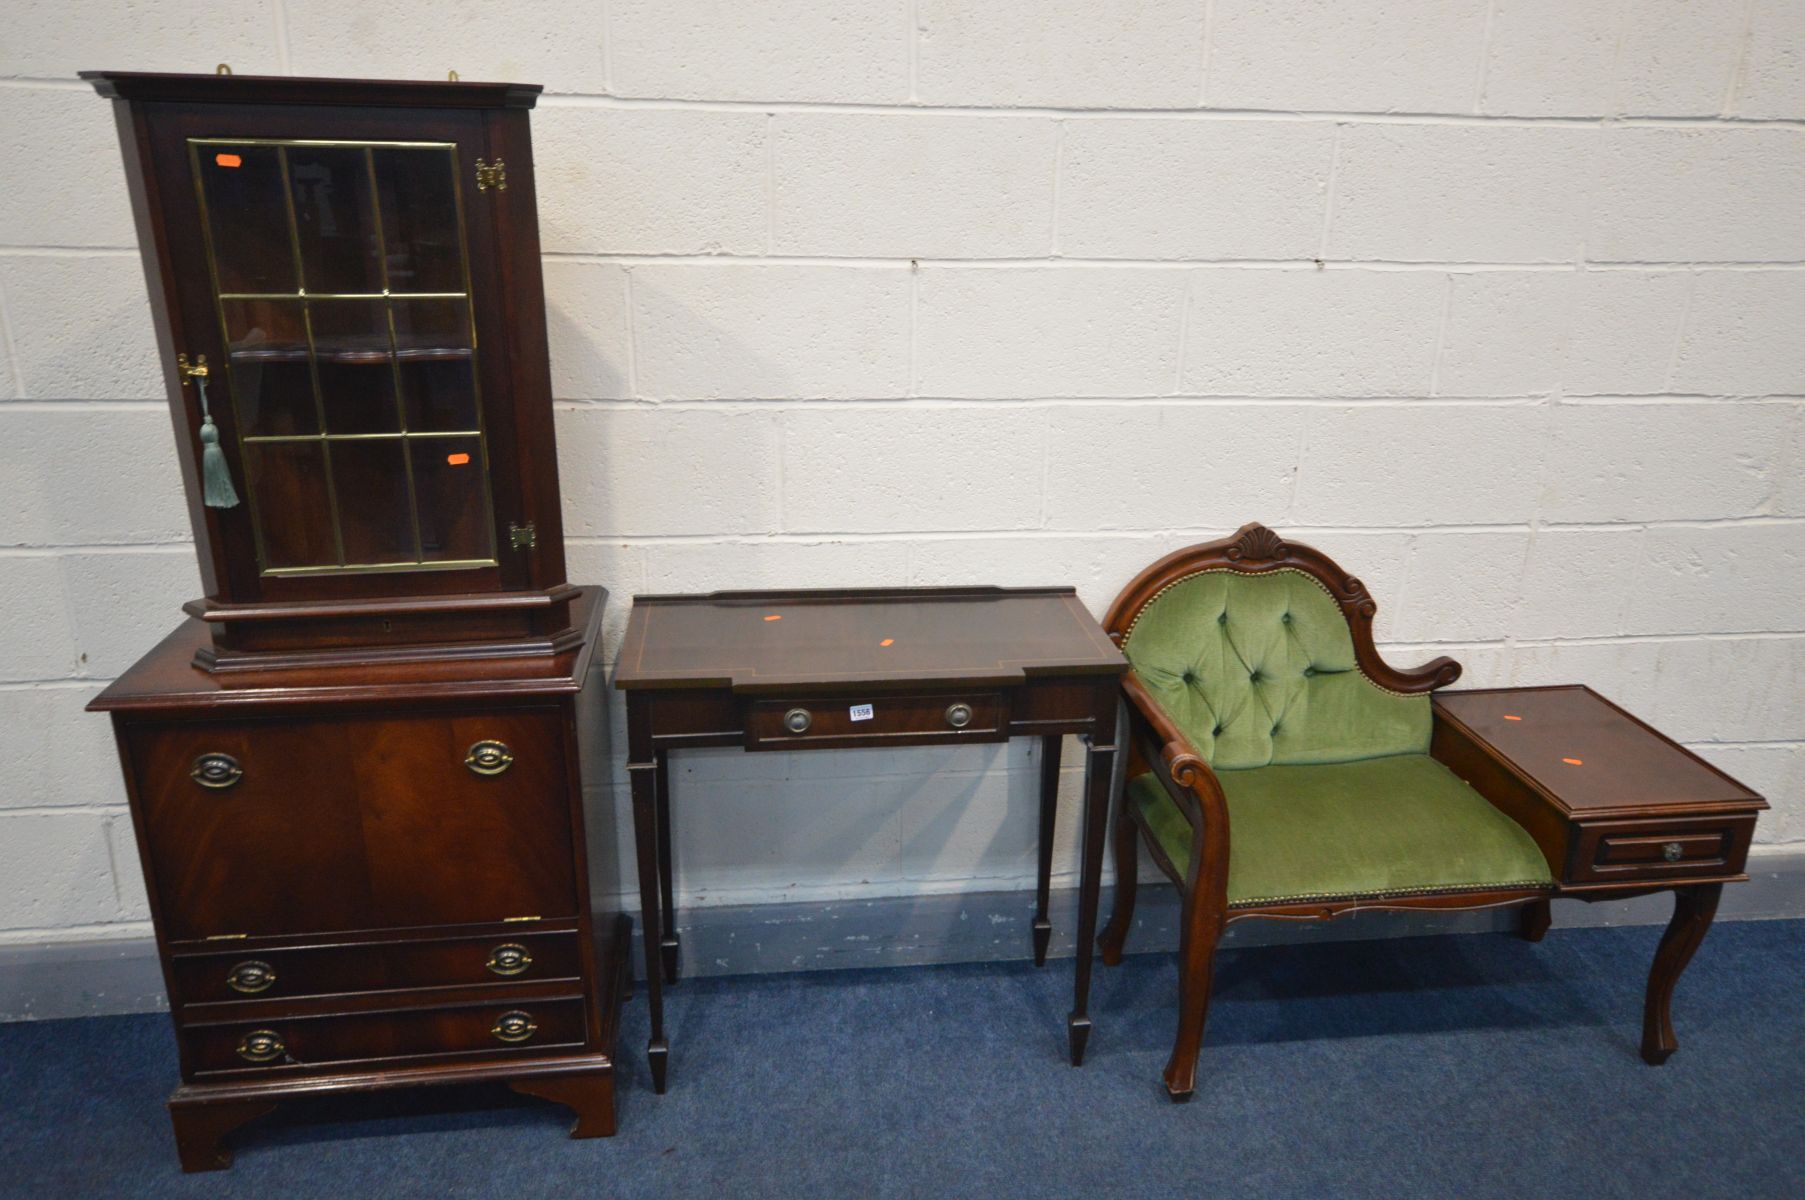 FOUR VARIOUS PIECES OF MAHOGANY FURNITURE, to include a telephone table/seat (this item does not